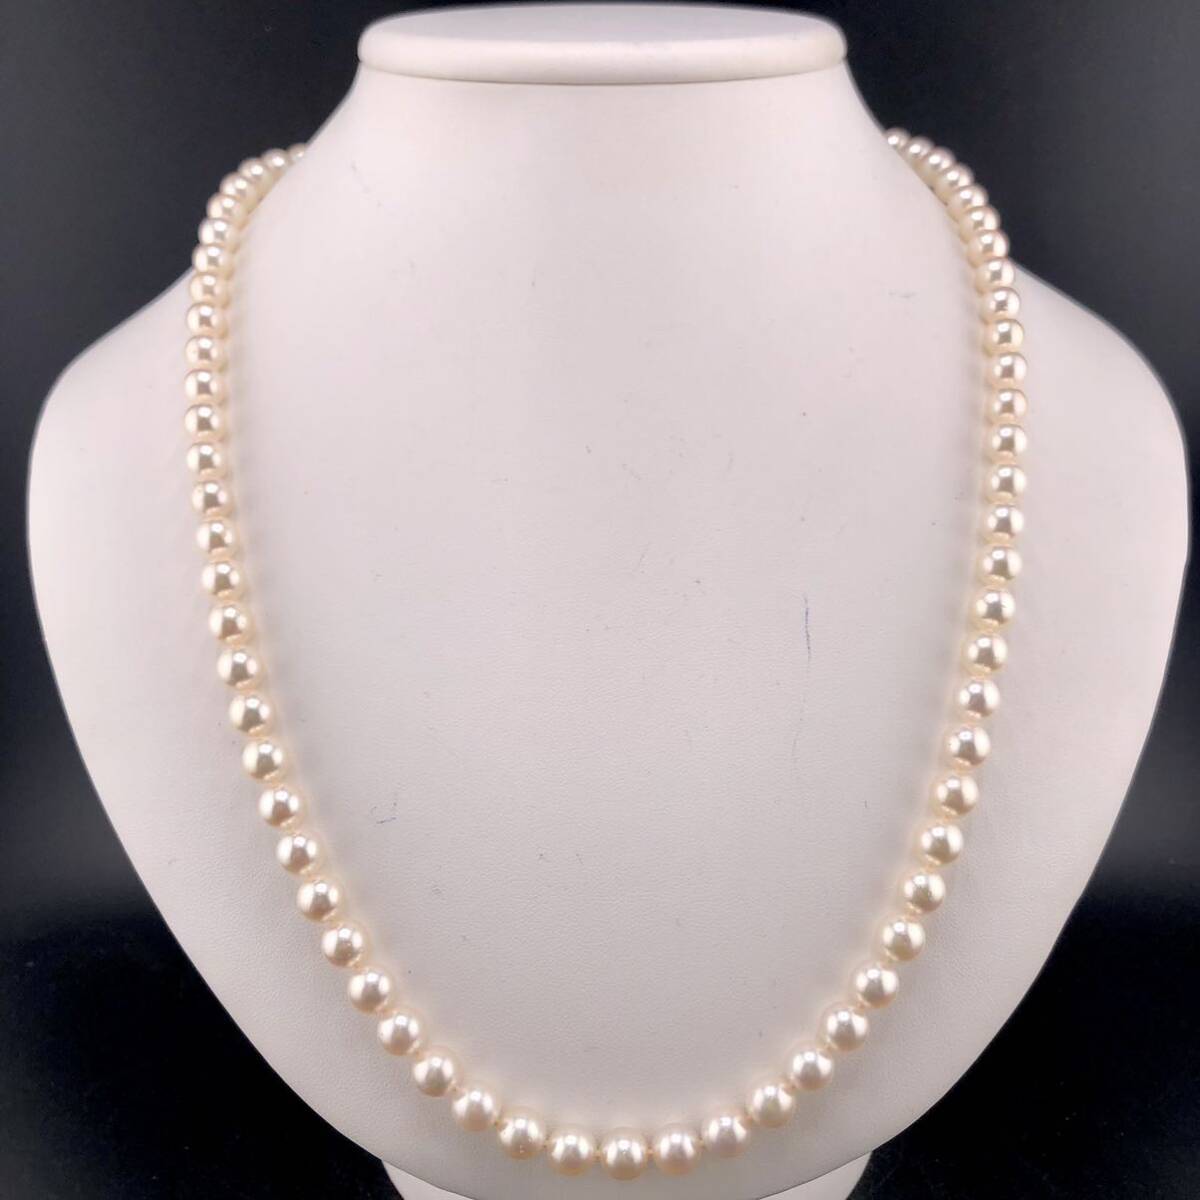 E05-5188☆☆ アコヤパールネックレス 7.0mm~7.5mm 58cm 44.9g ( アコヤ真珠 Pearl necklace SILVER )_画像1